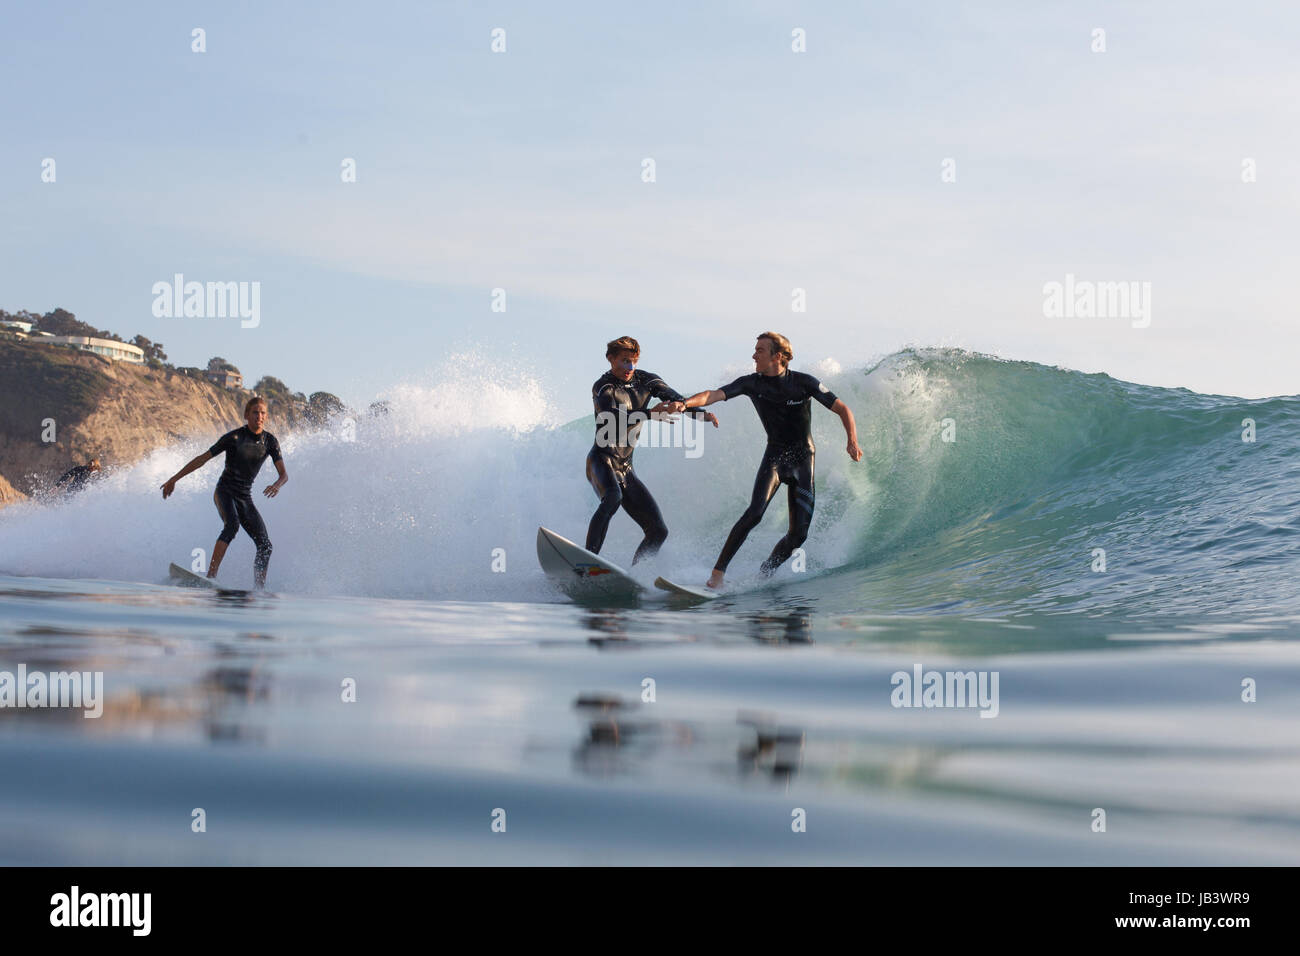 Overcrowded waves in Southern California lead two surfers to engage in a fistfight while surfing at Black's Beach. Stock Photo